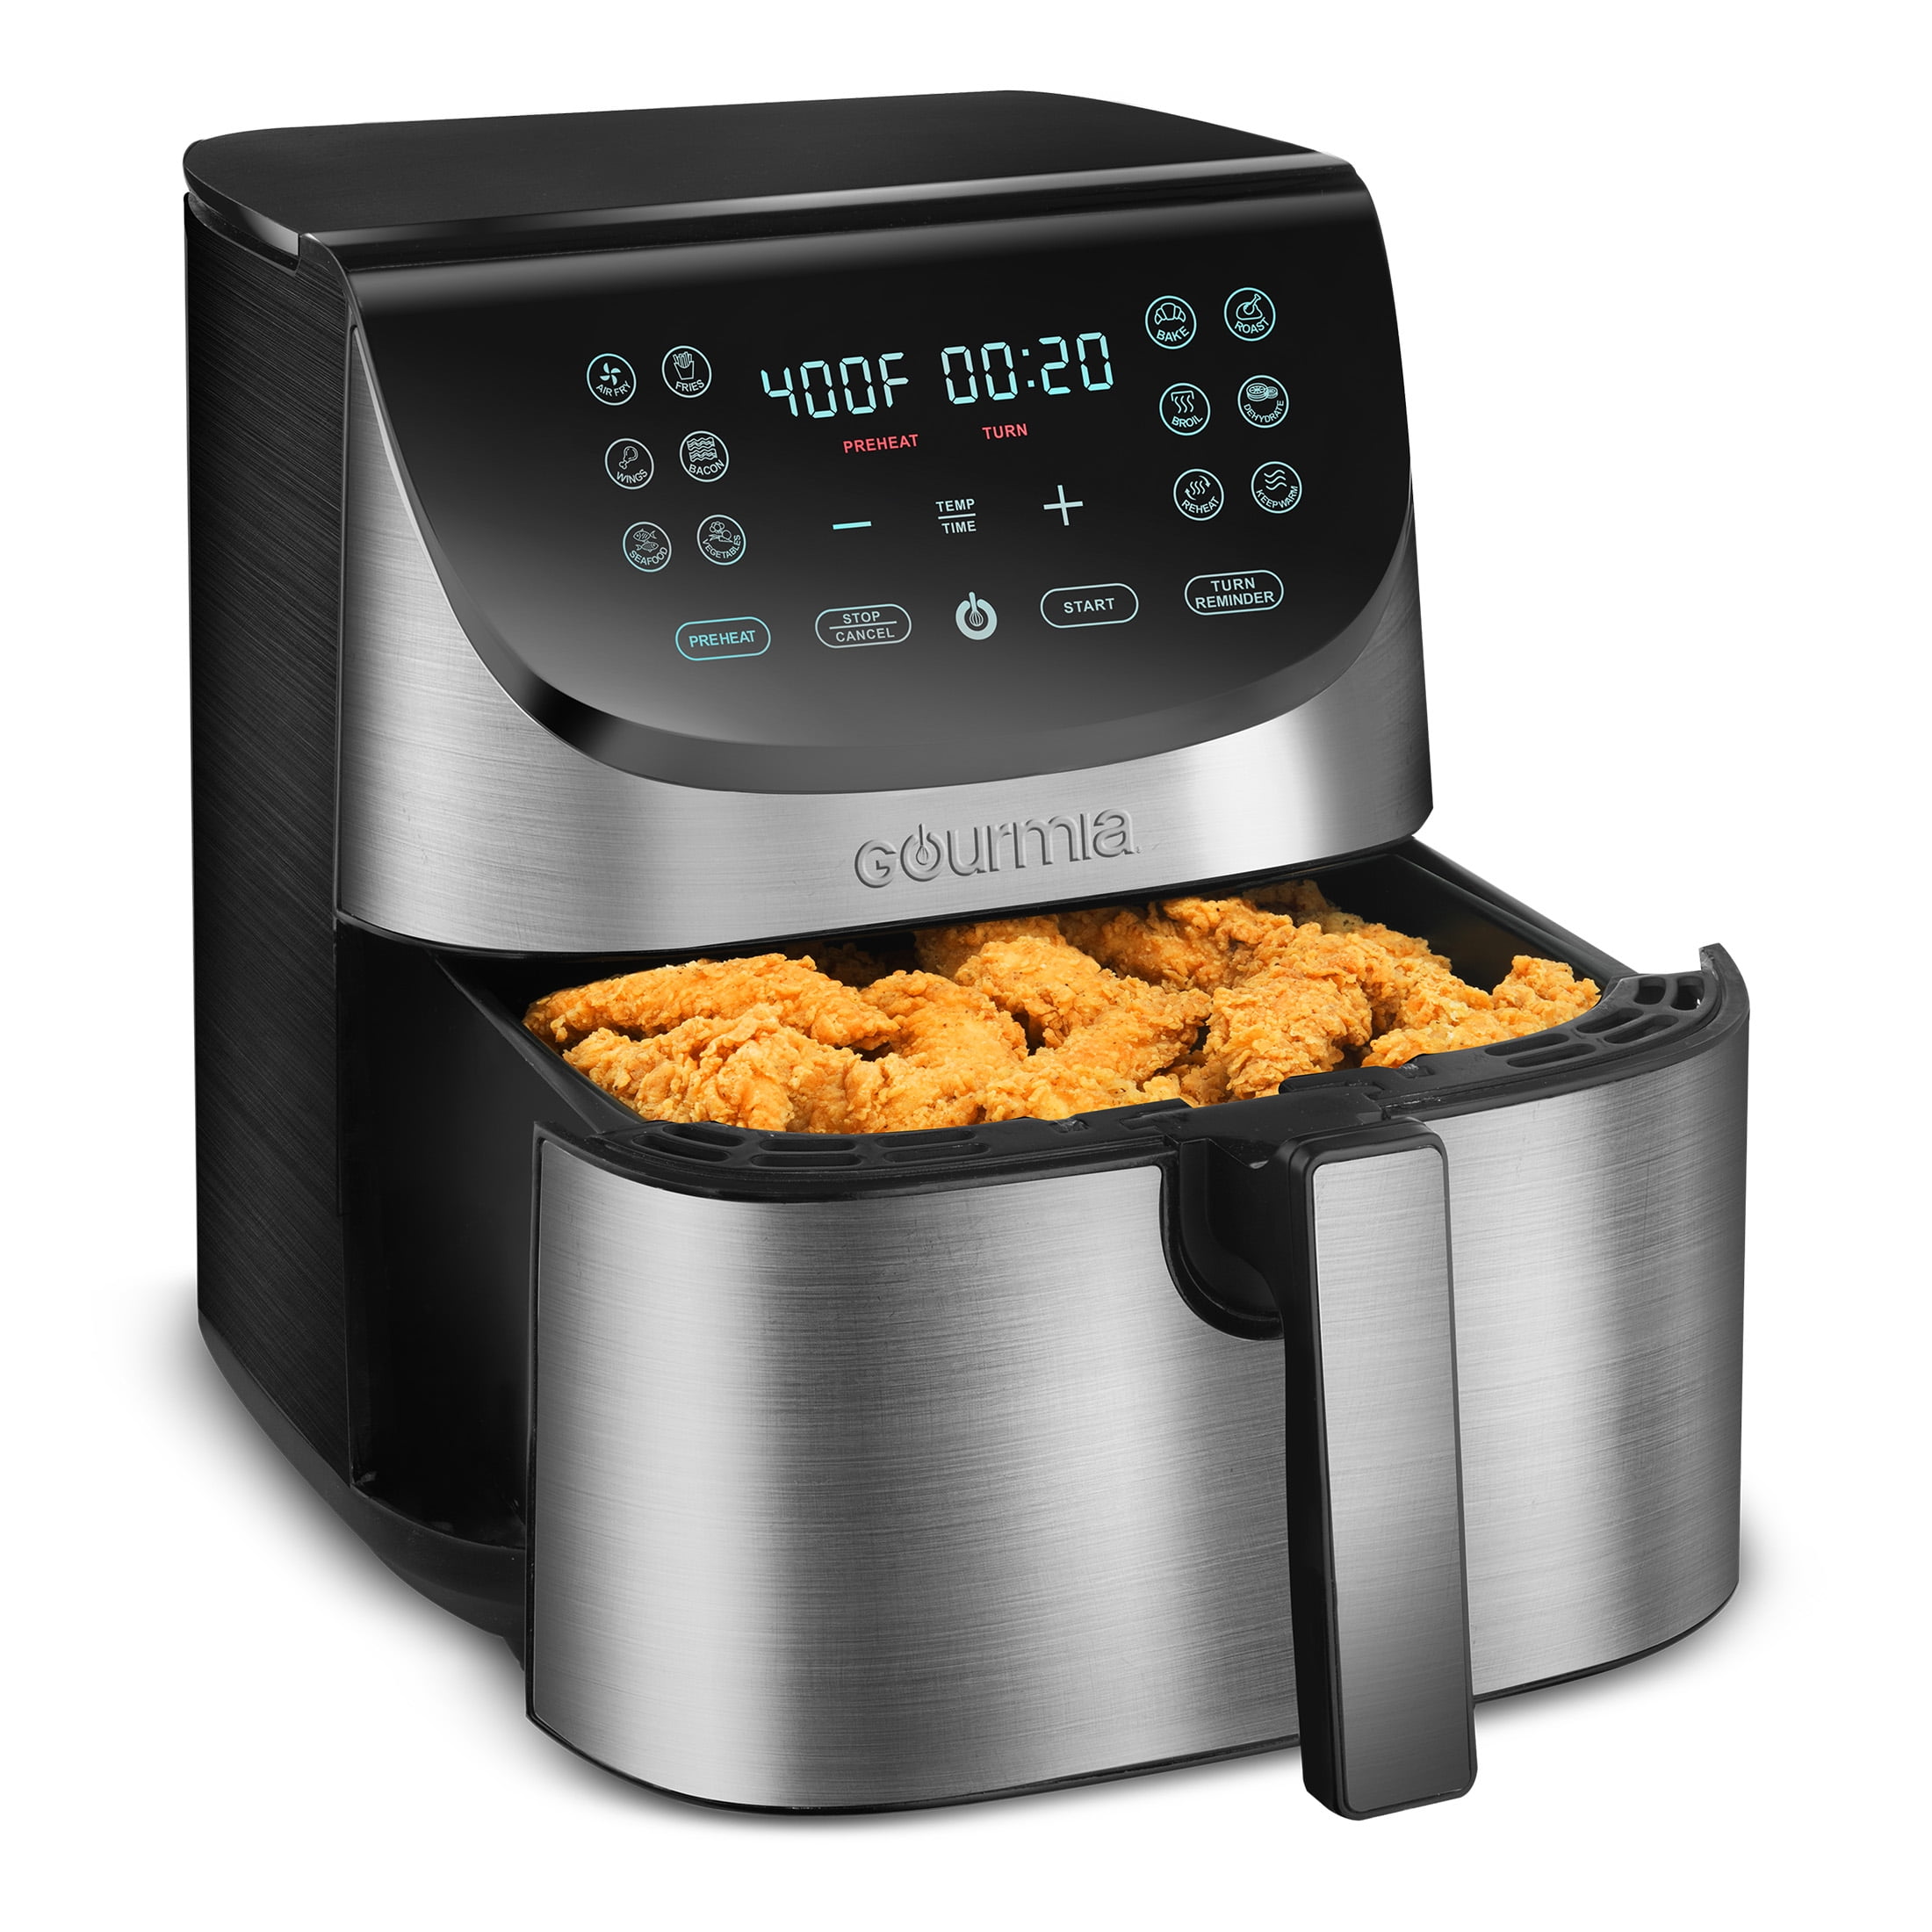  Gourmia Air Fryer Oven Digital Display 8 Quart Large AirFryer  Cooker 12 Touch Cooking Presets, XL Air Fryer Basket 1700w Power  Multifunction GAF856 Black and Stainless stainless steel air fryer 